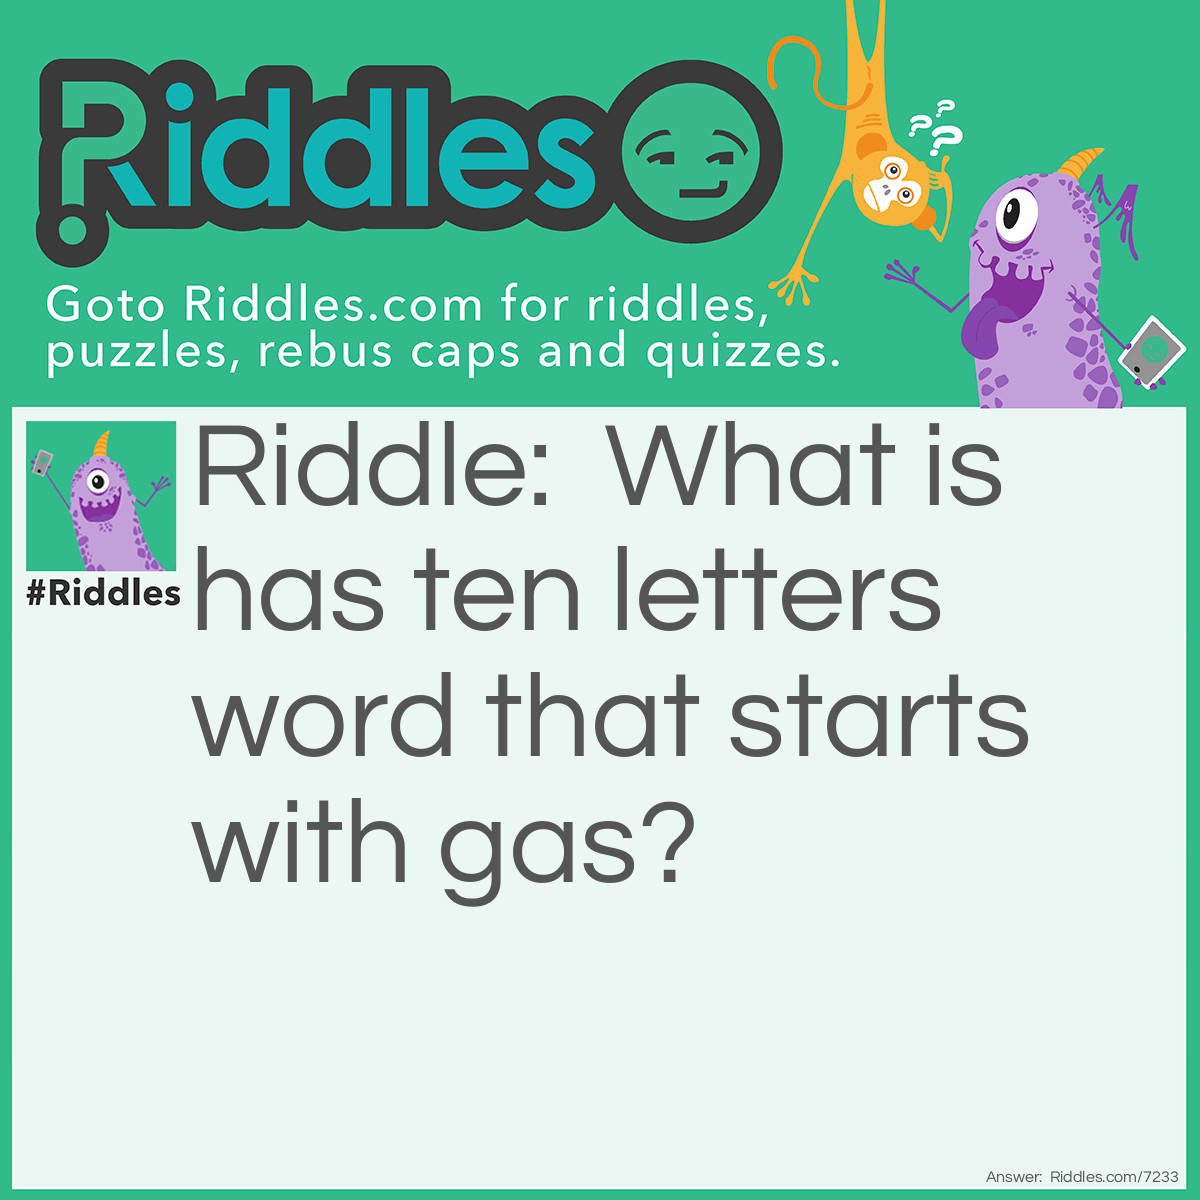 Riddle: What is a ten letter word that starts with gas? Answer: An Automobile.